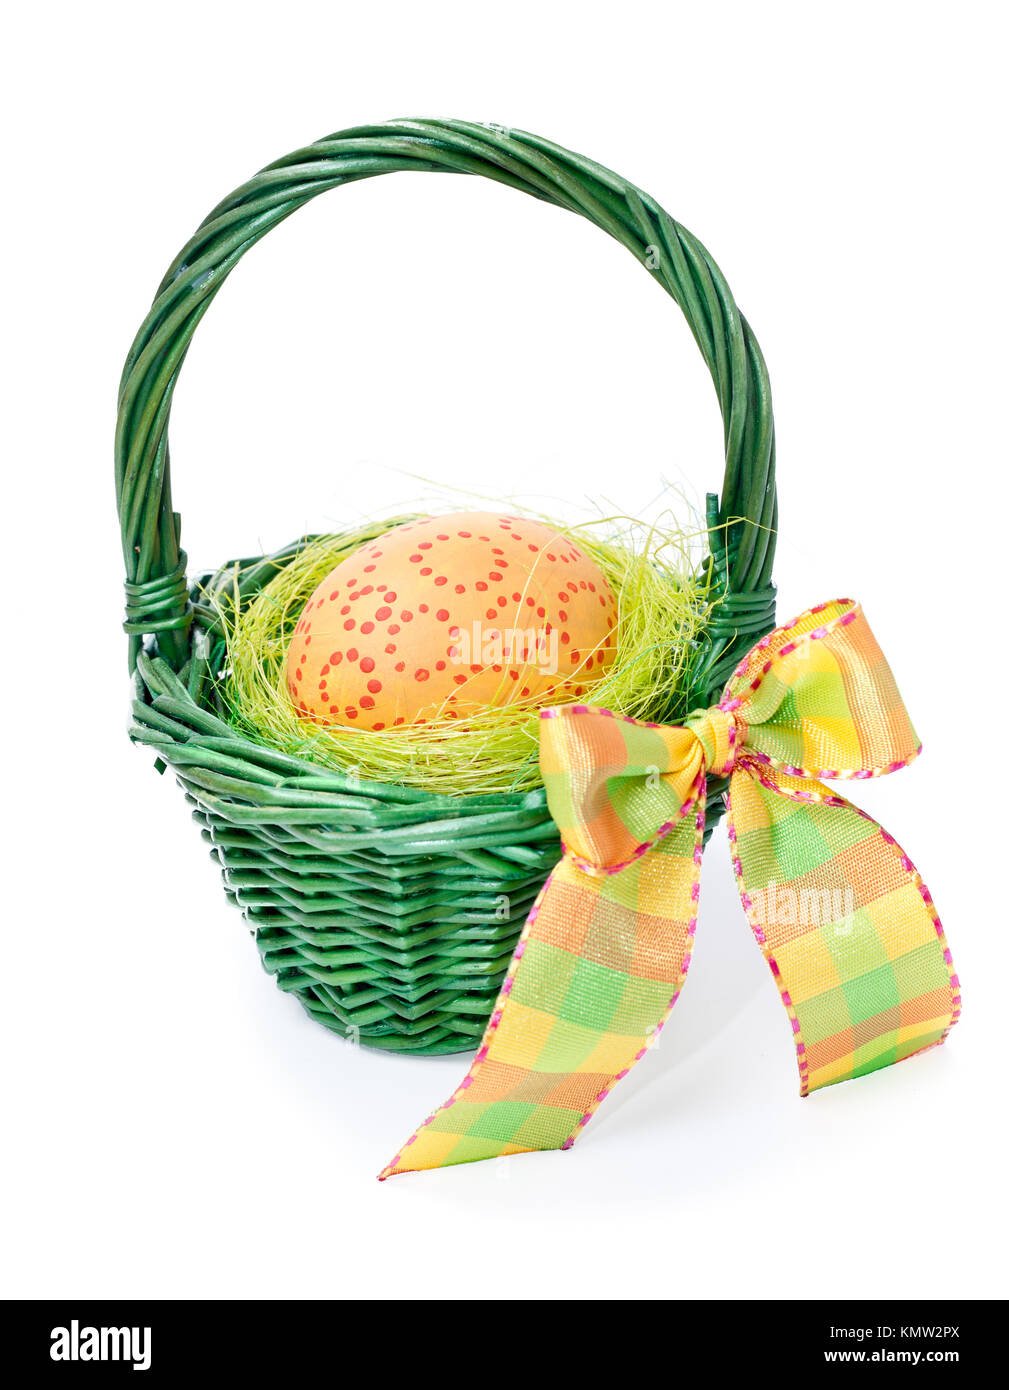 Orange Easter Egg with point circles in a green straw basket with a bow isolated on white Stock Photo